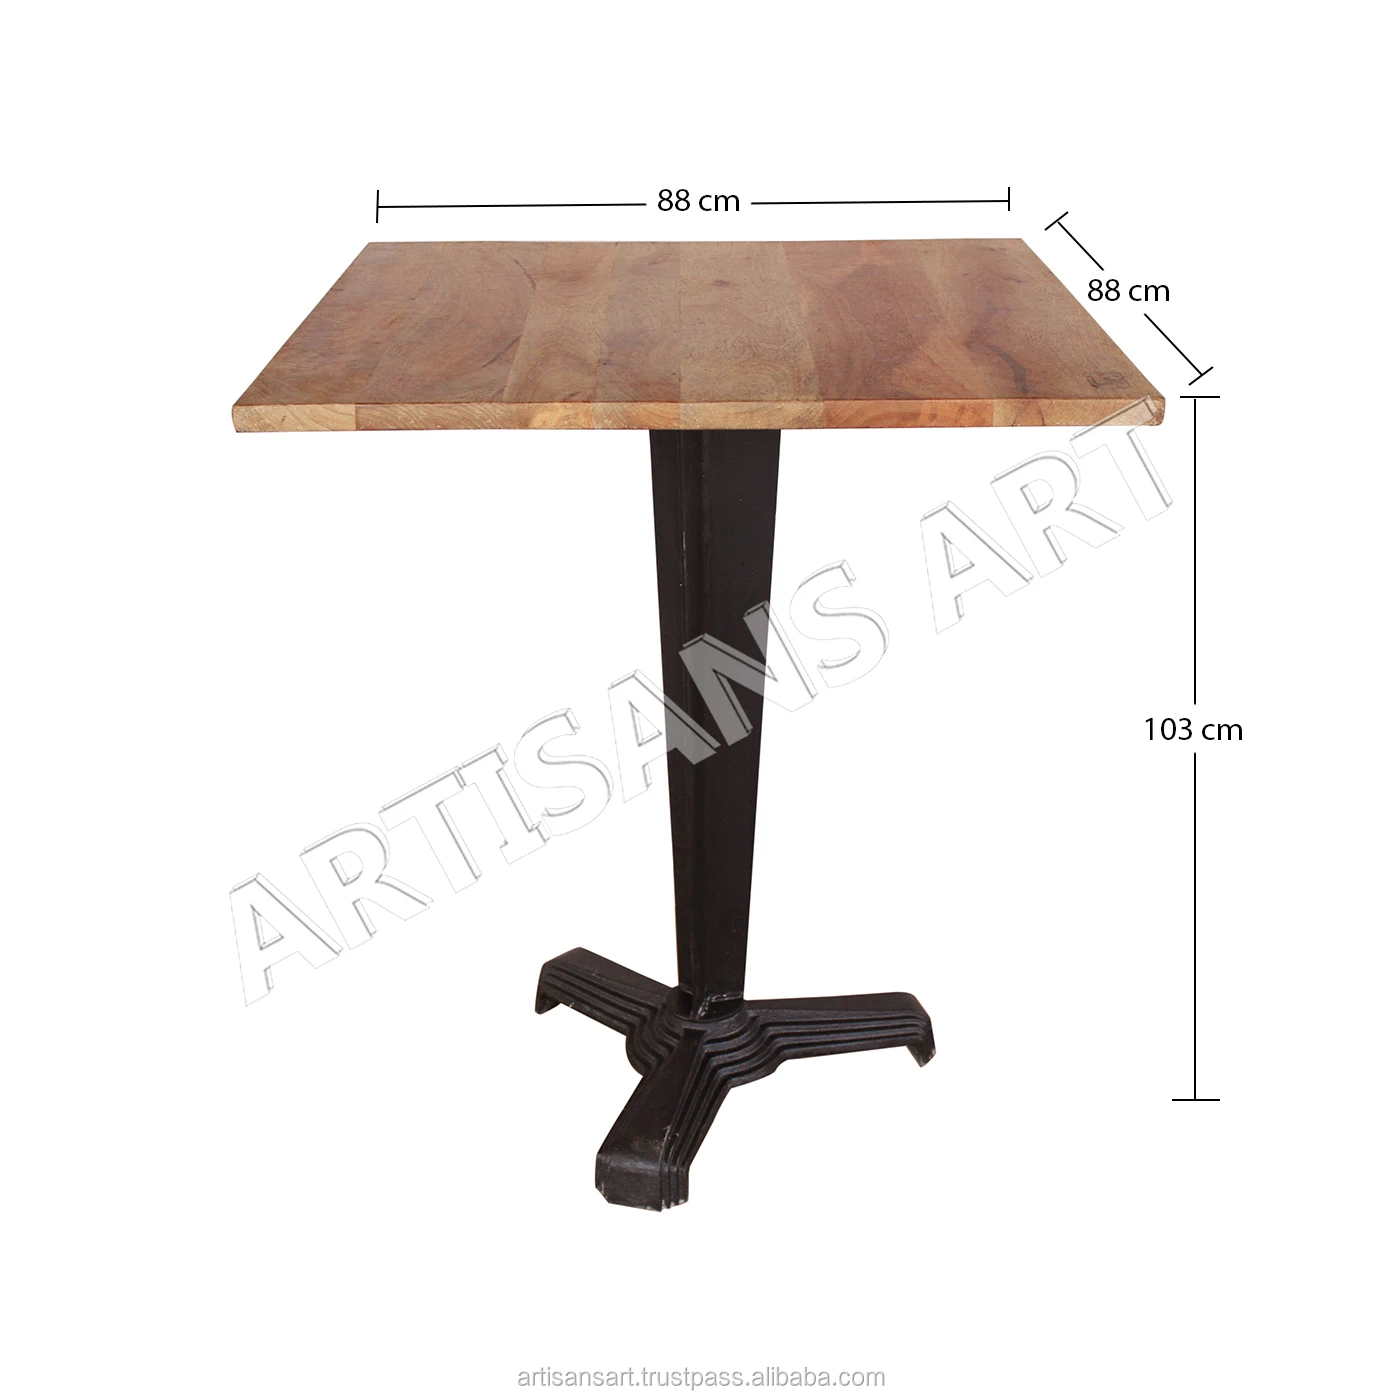 New rustic wooden table base with a new 70cmx70cm table top pub restaurant cafe 